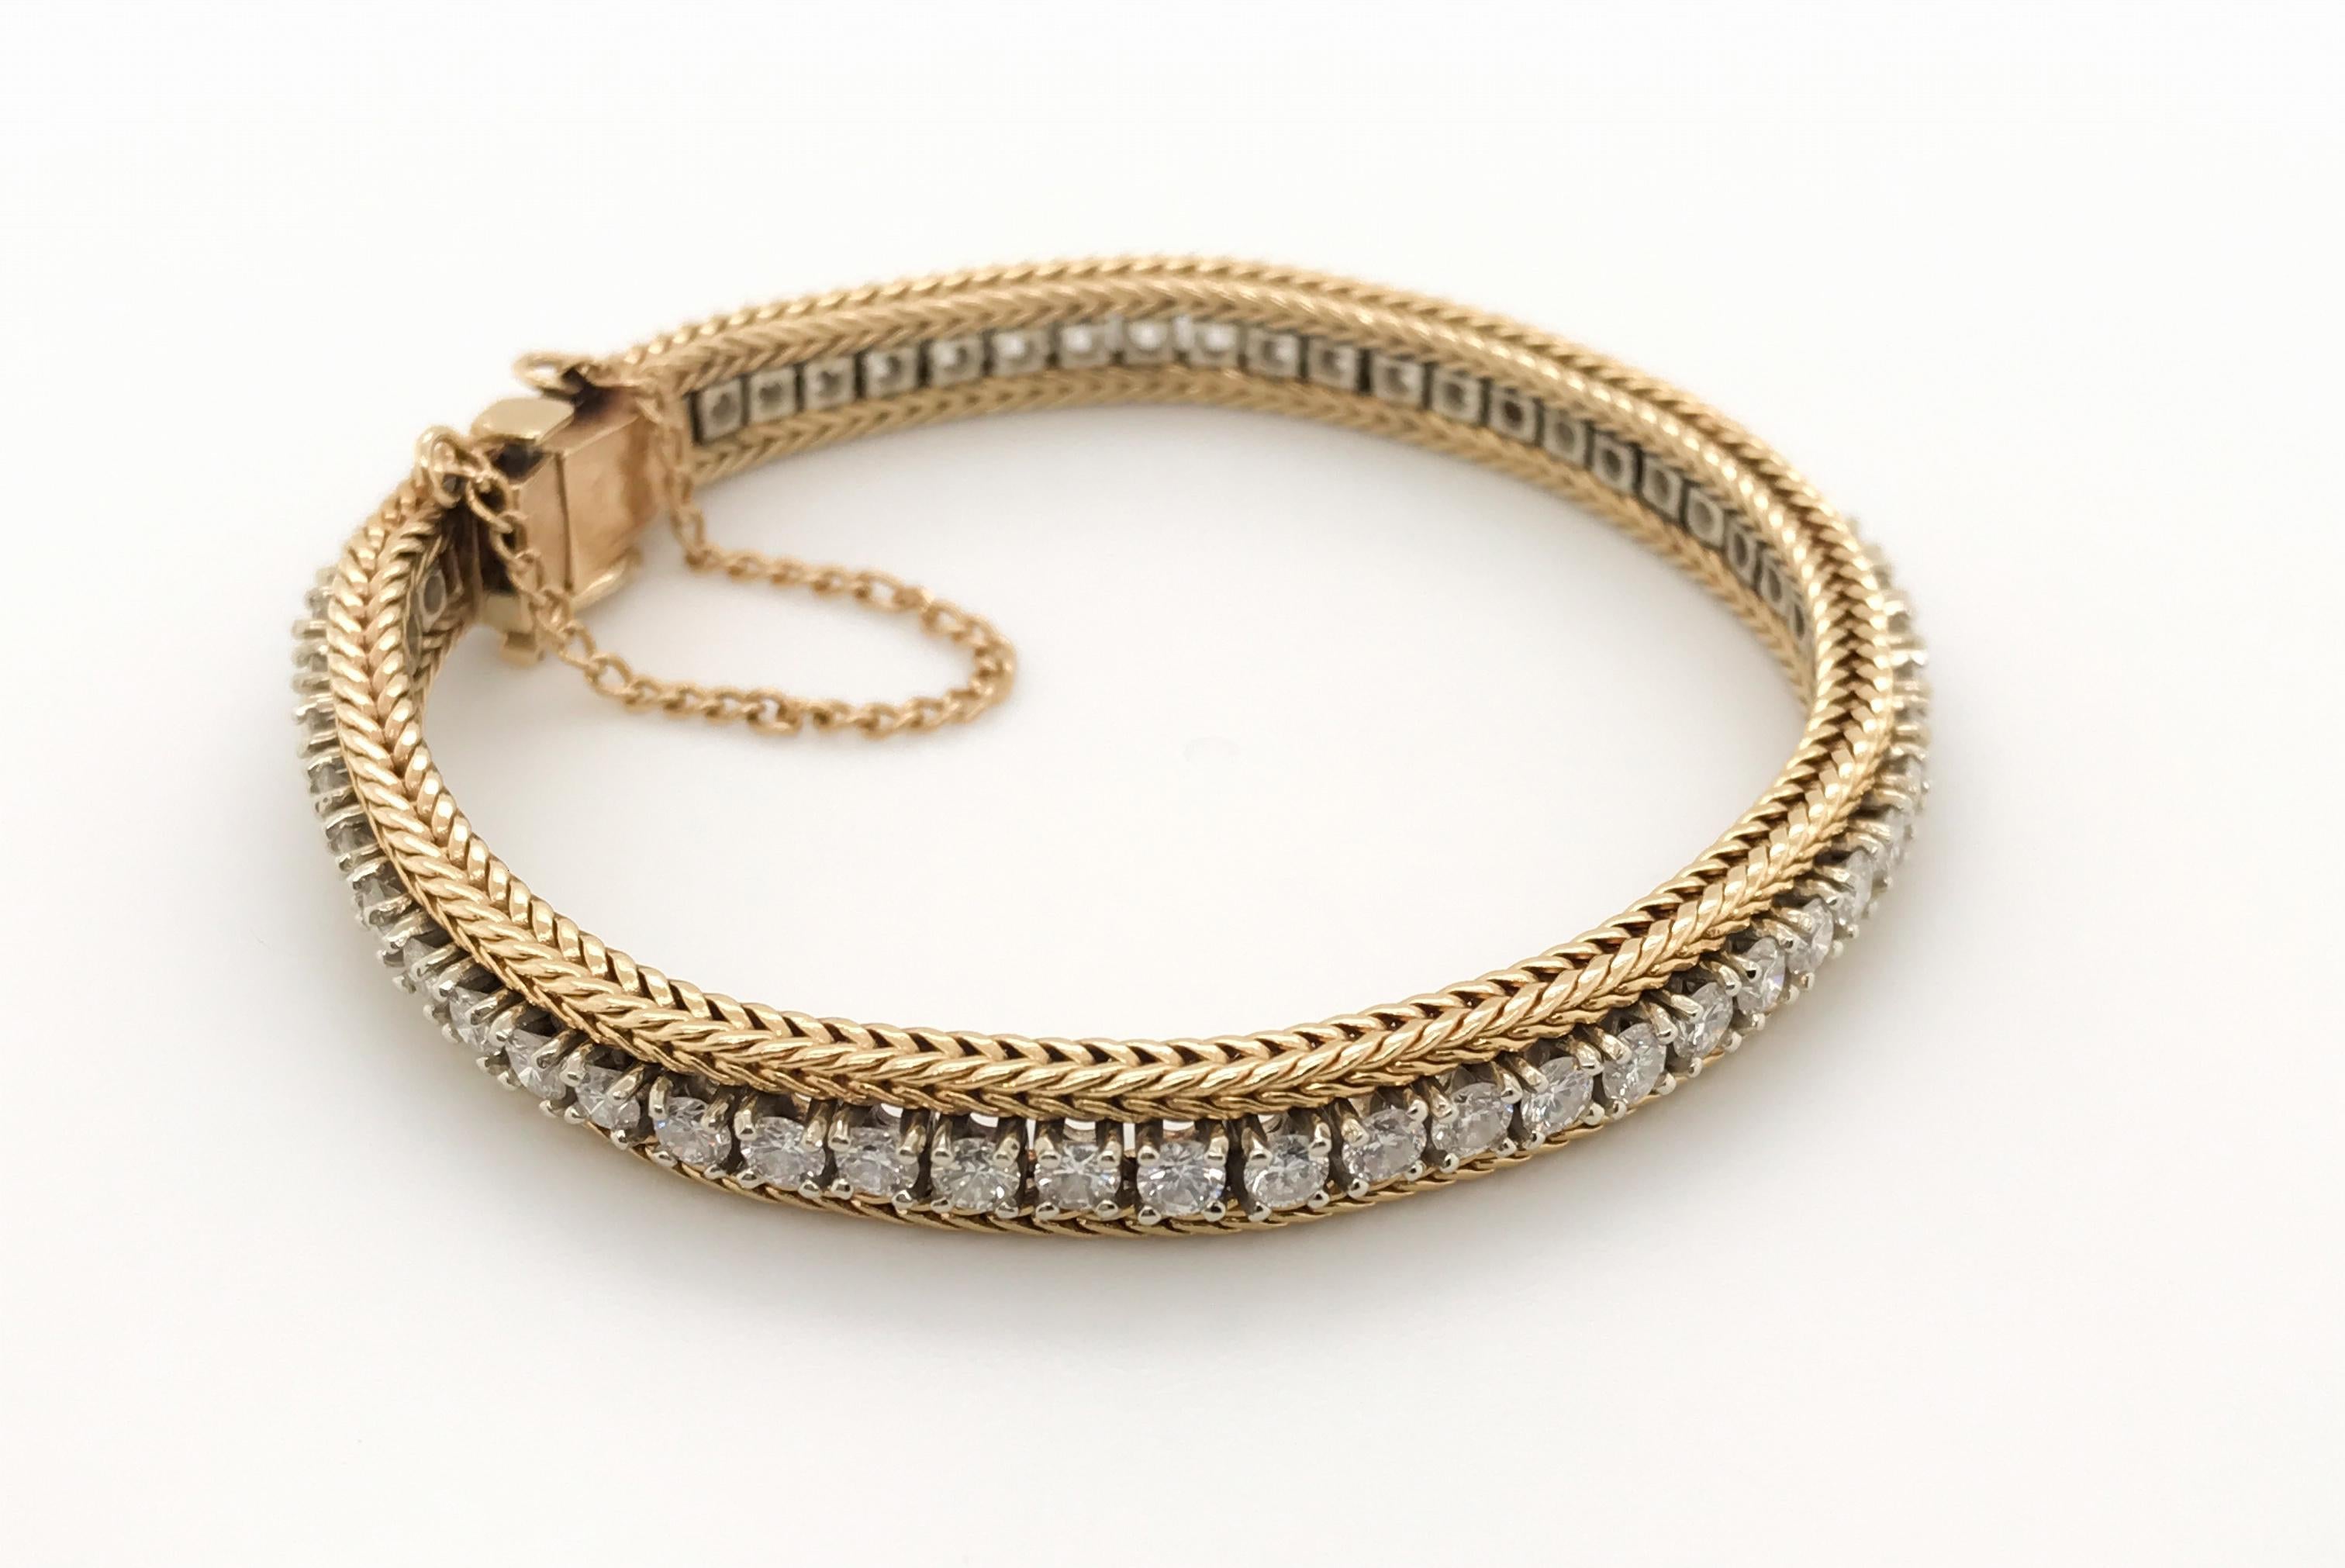 A twist on the popular tennis bracelet with finely crafted rope links either side of a line of diamonds. This is such a classic look and so wearable for everyday. 57 claw set brilliant cut white diamonds mounted in 14k yellow gold, it's flexible and